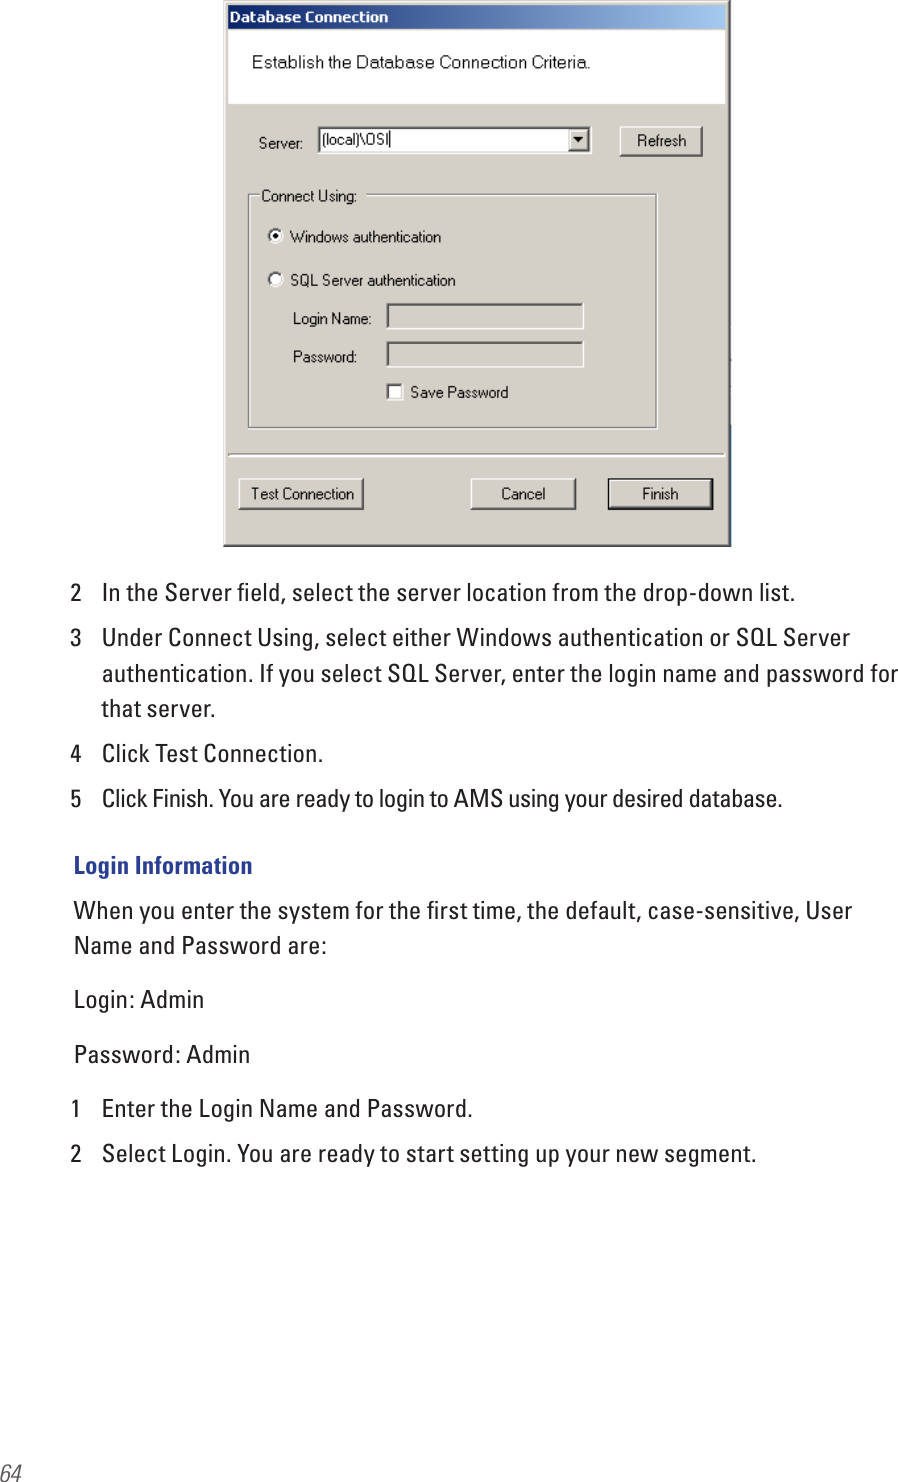 642  In the Server ﬁeld, select the server location from the drop-down list.3  Under Connect Using, select either Windows authentication or SQL Server authentication. If you select SQL Server, enter the login name and password for that server.4  Click Test Connection.5  Click Finish. You are ready to login to AMS using your desired database. Login InformationWhen you enter the system for the ﬁrst time, the default, case-sensitive, User Name and Password are:Login: AdminPassword: Admin1  Enter the Login Name and Password. 2  Select Login. You are ready to start setting up your new segment.